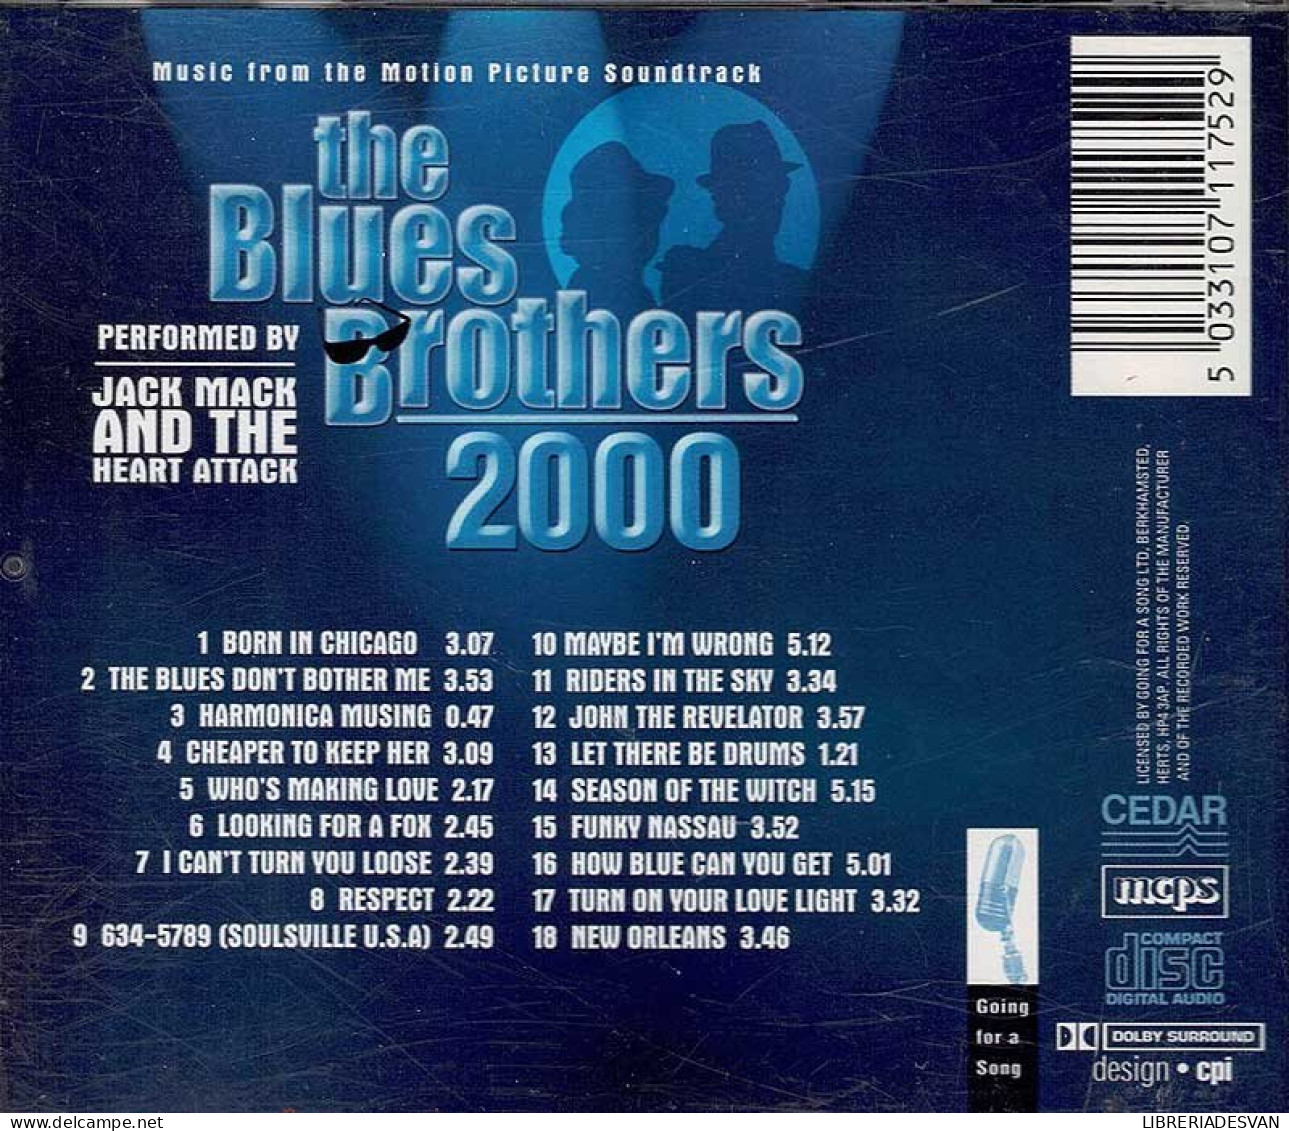 Jack Mack And The Heart Attack - The Blues Brothers 2000: Music From The Motion Picture Soundtrack. CD - Soundtracks, Film Music